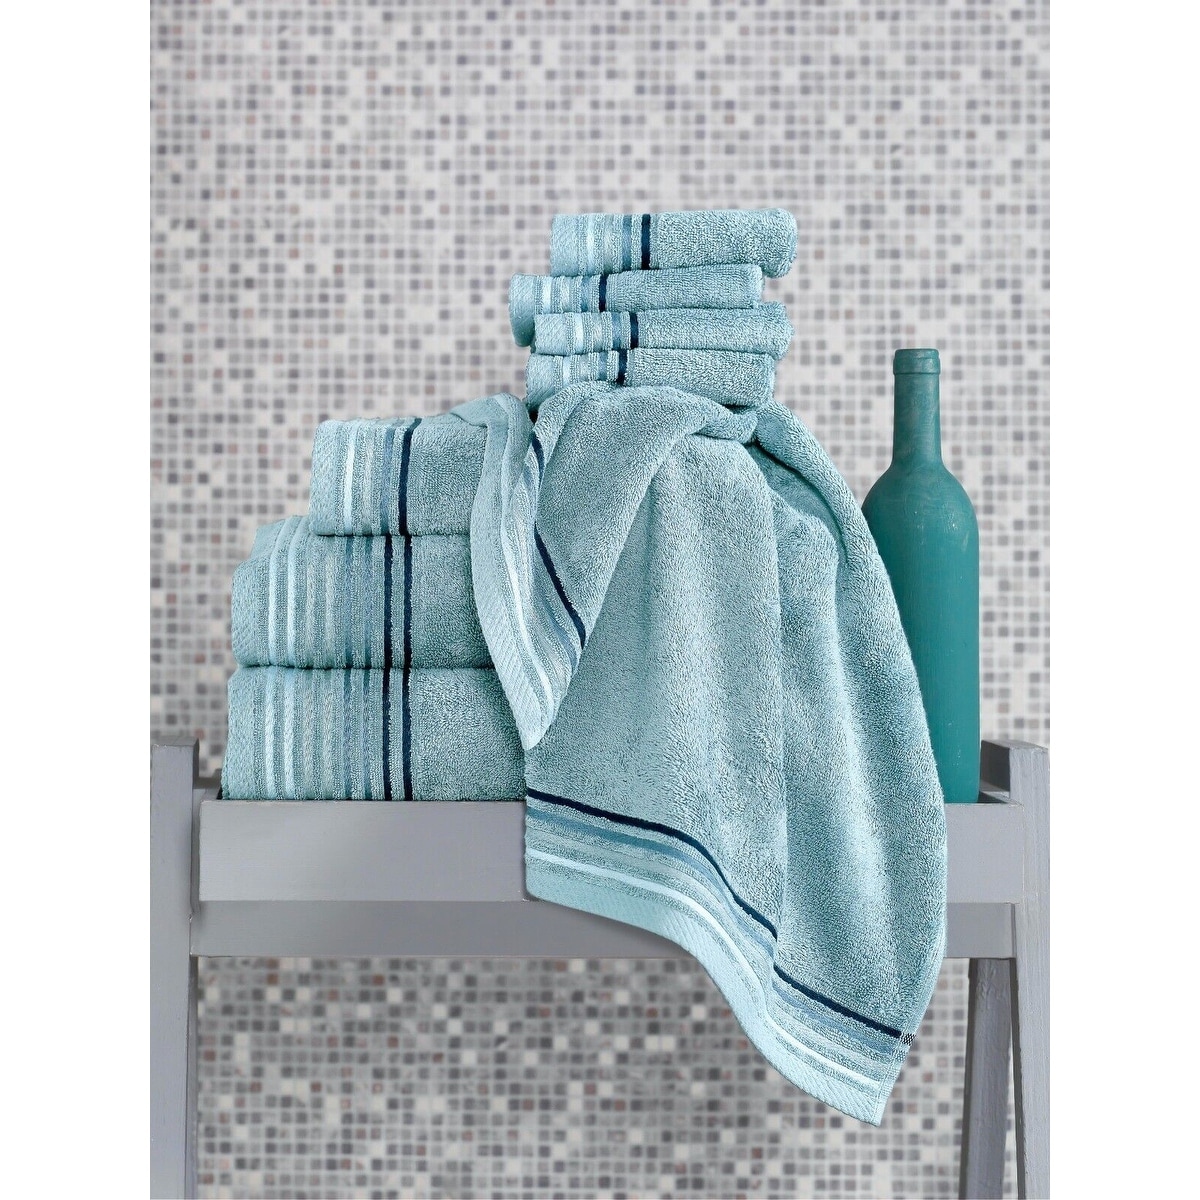 https://ak1.ostkcdn.com/images/products/is/images/direct/15afe6b9f4b1d0732fc571821e806f91738d680b/Royal-Turkish-Towels-Turkish-Cotton-Bamboo-Bathroom-Towel---Heavy-Duty-Soft-and-Luxurious-Towel-Set-%28Set-of-8%29.jpg